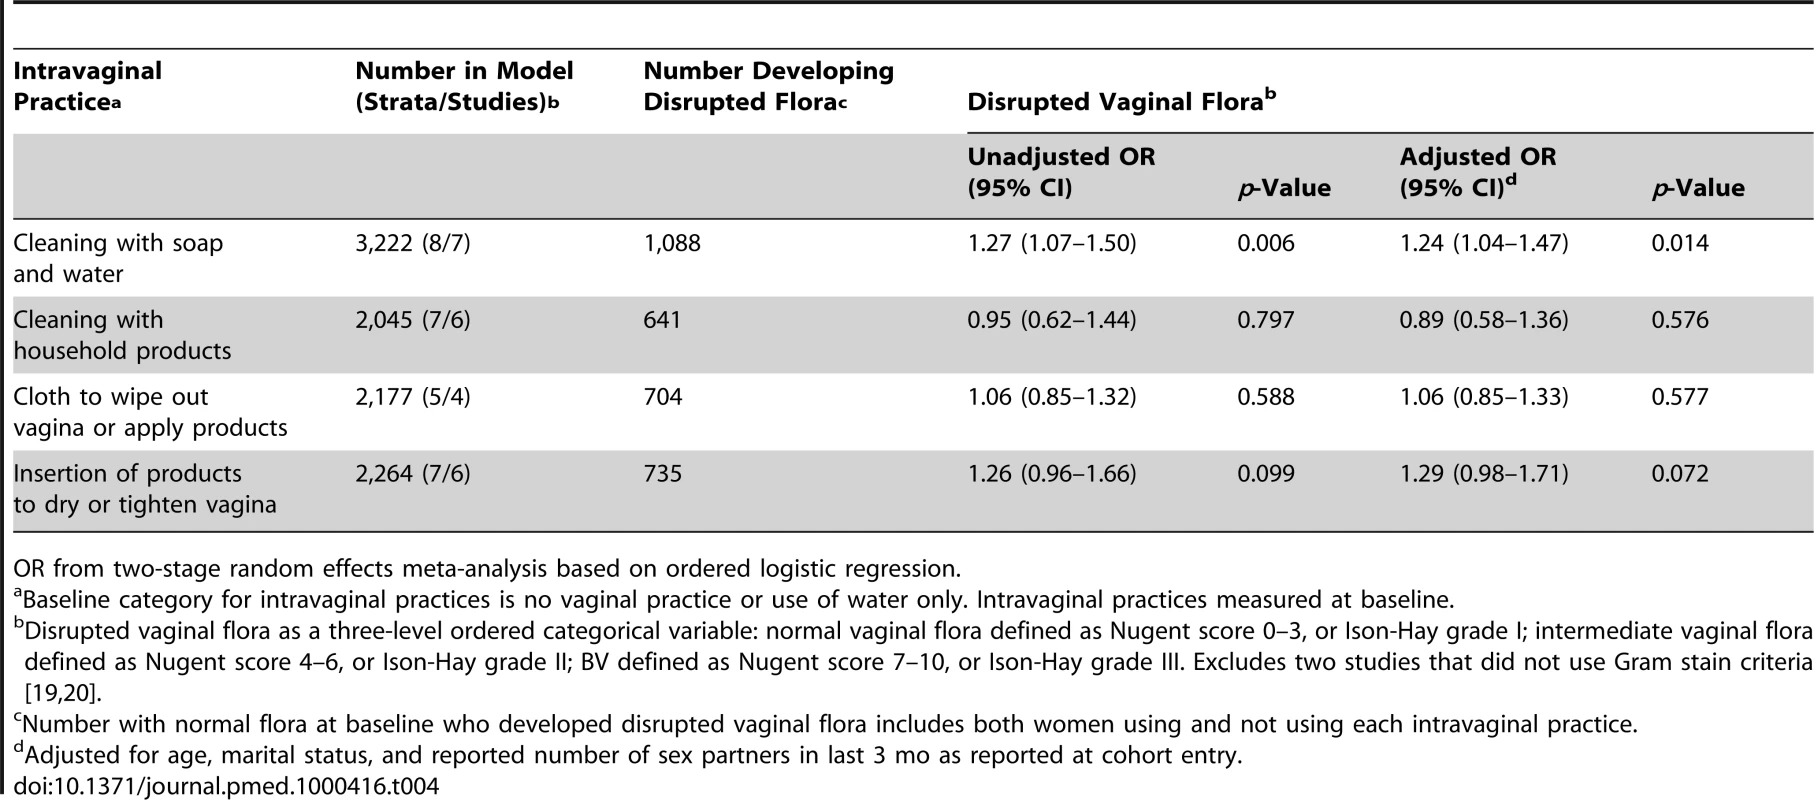 Associations between intravaginal practices and disrupted vaginal flora in women with normal vaginal flora at baseline.